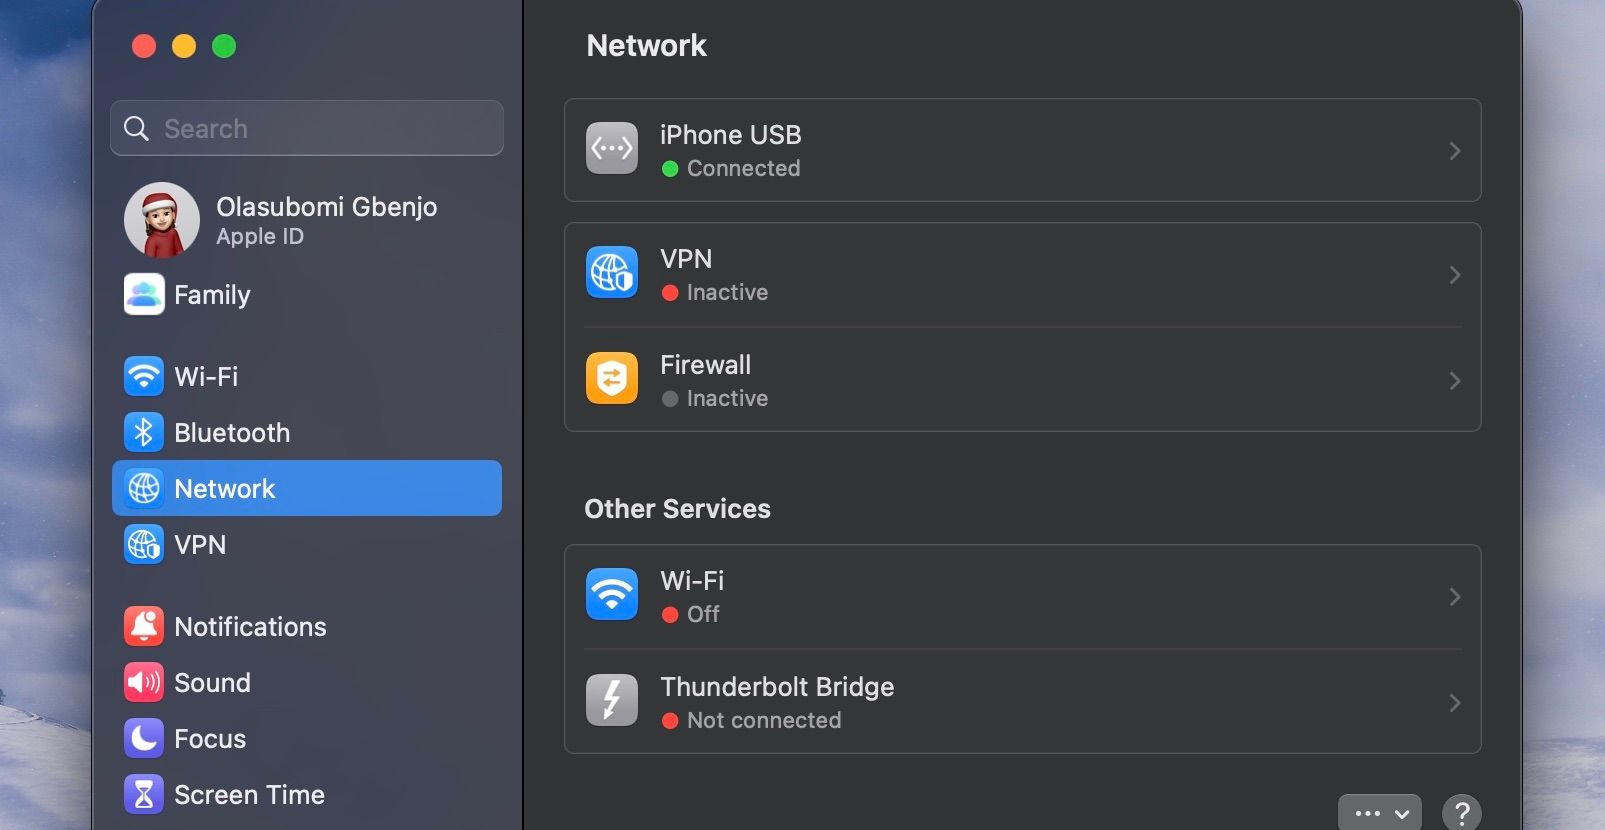 Screenshot of the iPhone USB section of network settings